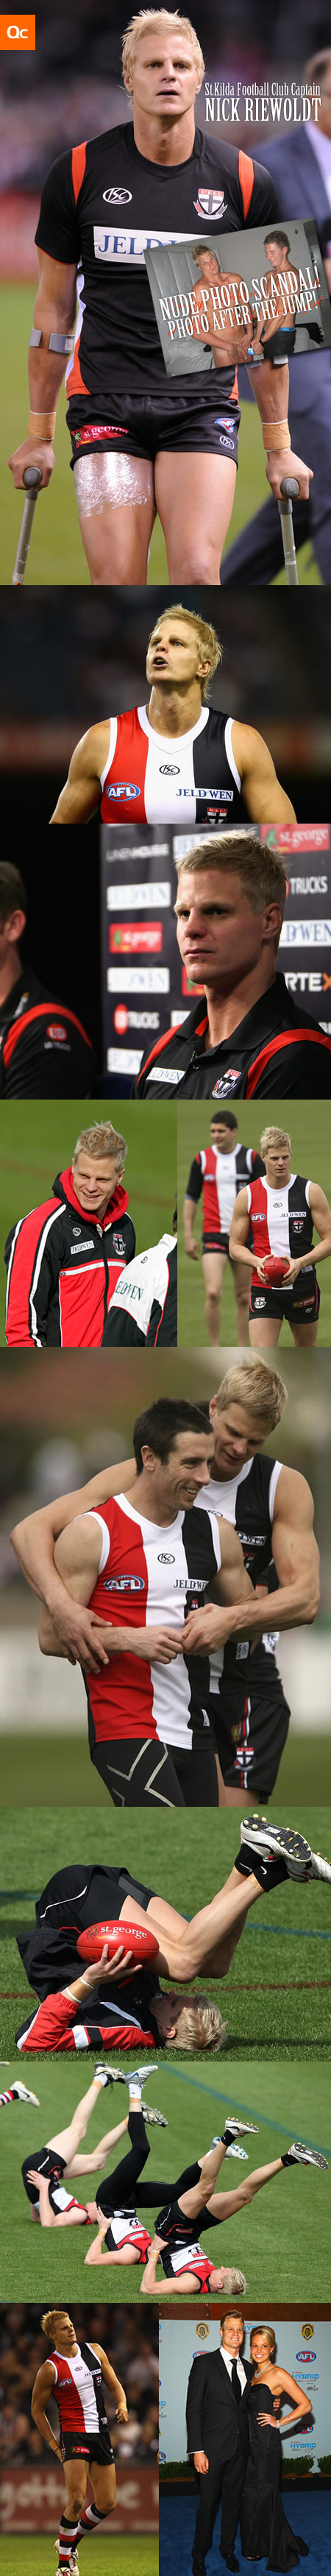 Nick Riewoldt Nude Photo Scandal photo